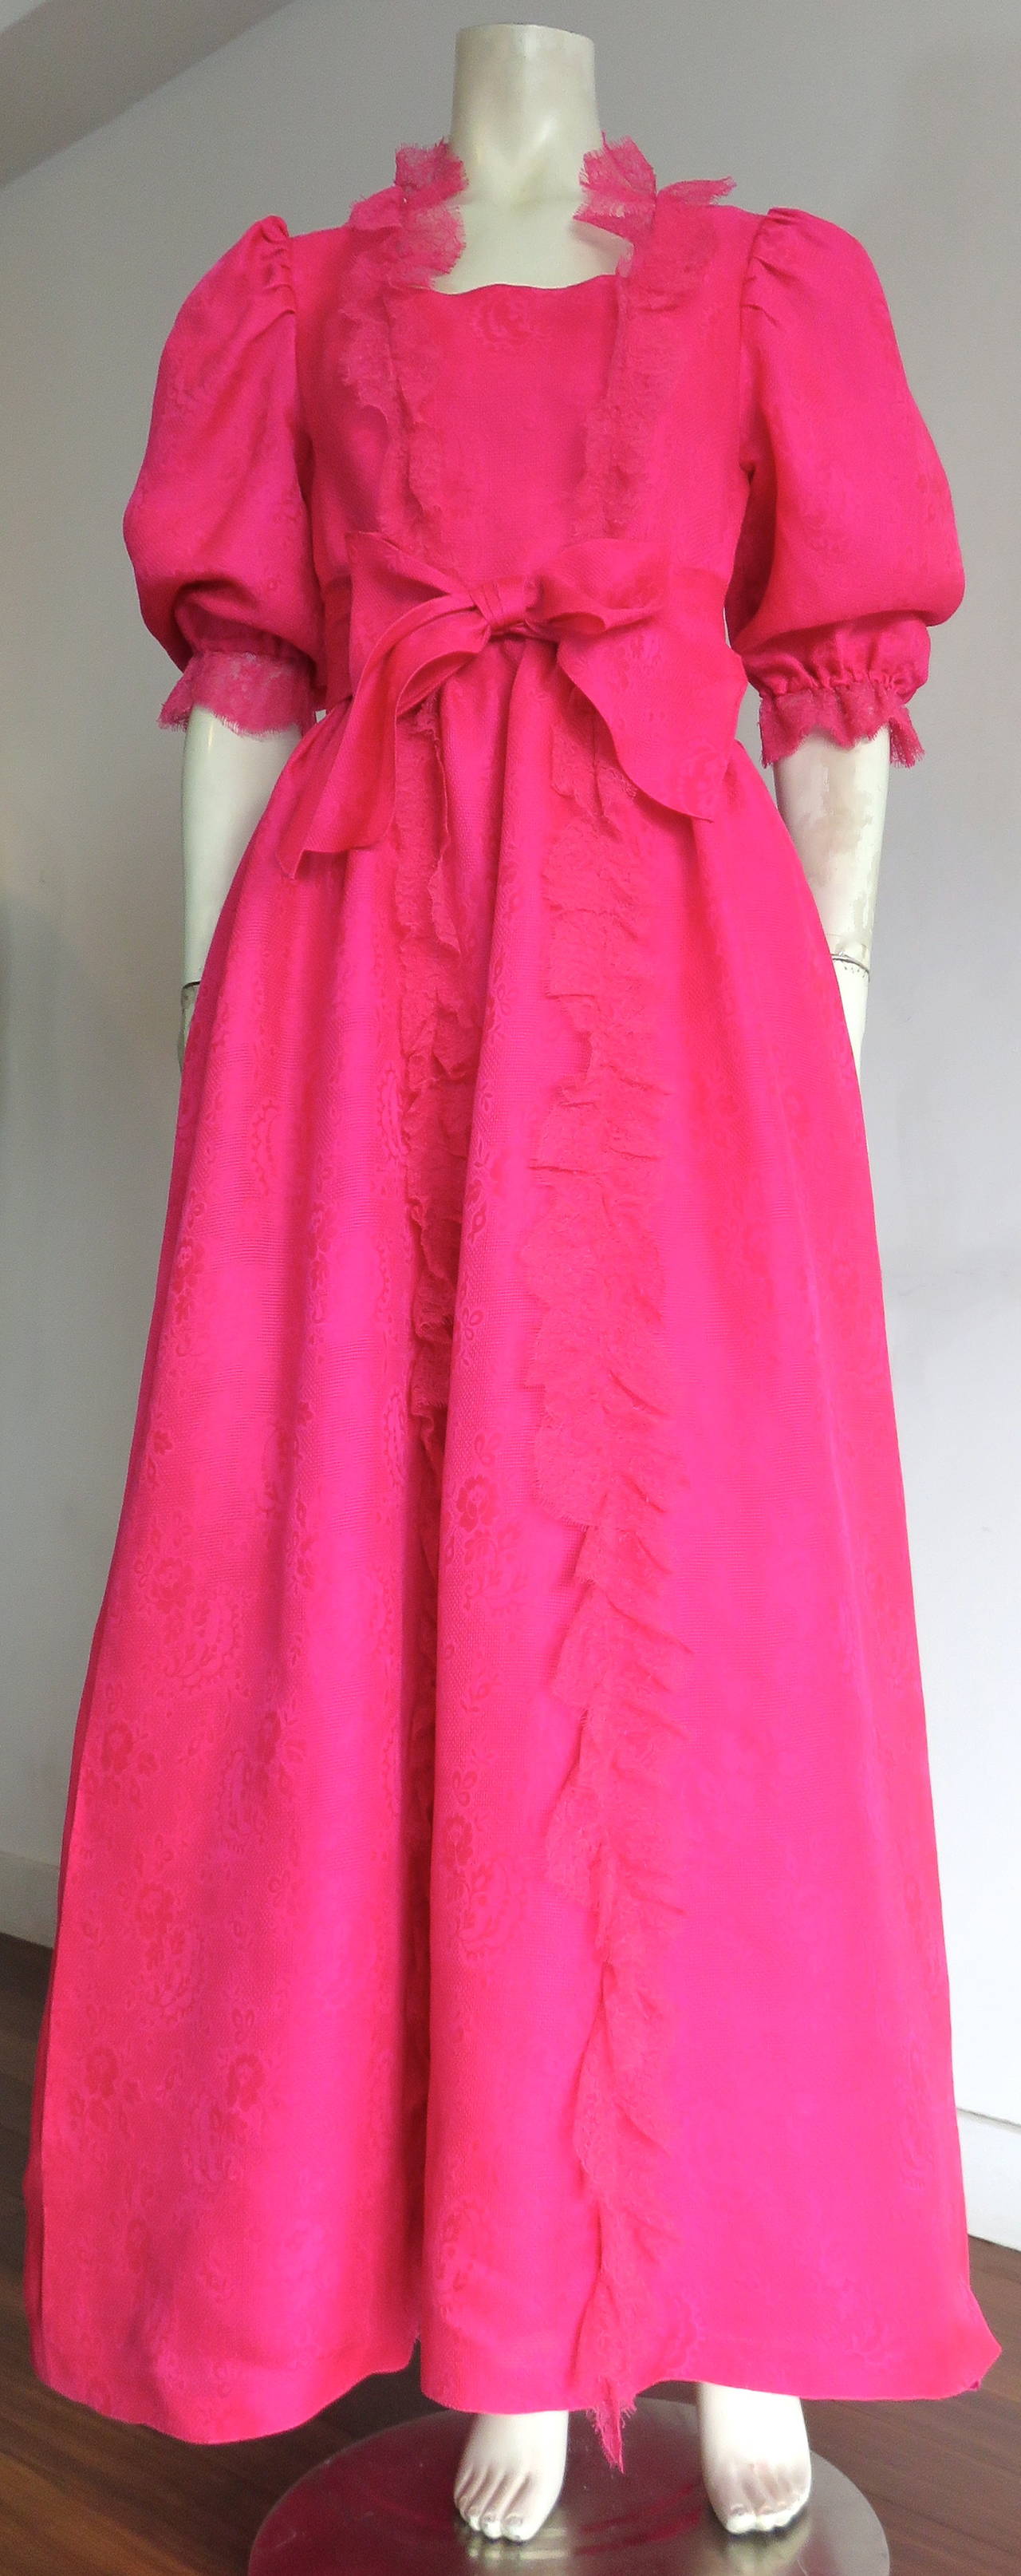 Excellent condition, 1970's, NINA RICCI PARIS, Haute pink silk evening gown.

This fabulous evening gown features luminous, silk jacquard fabrication in a beautiful, 'shocking pink', woven floral design.

The dress features floral lace trim with